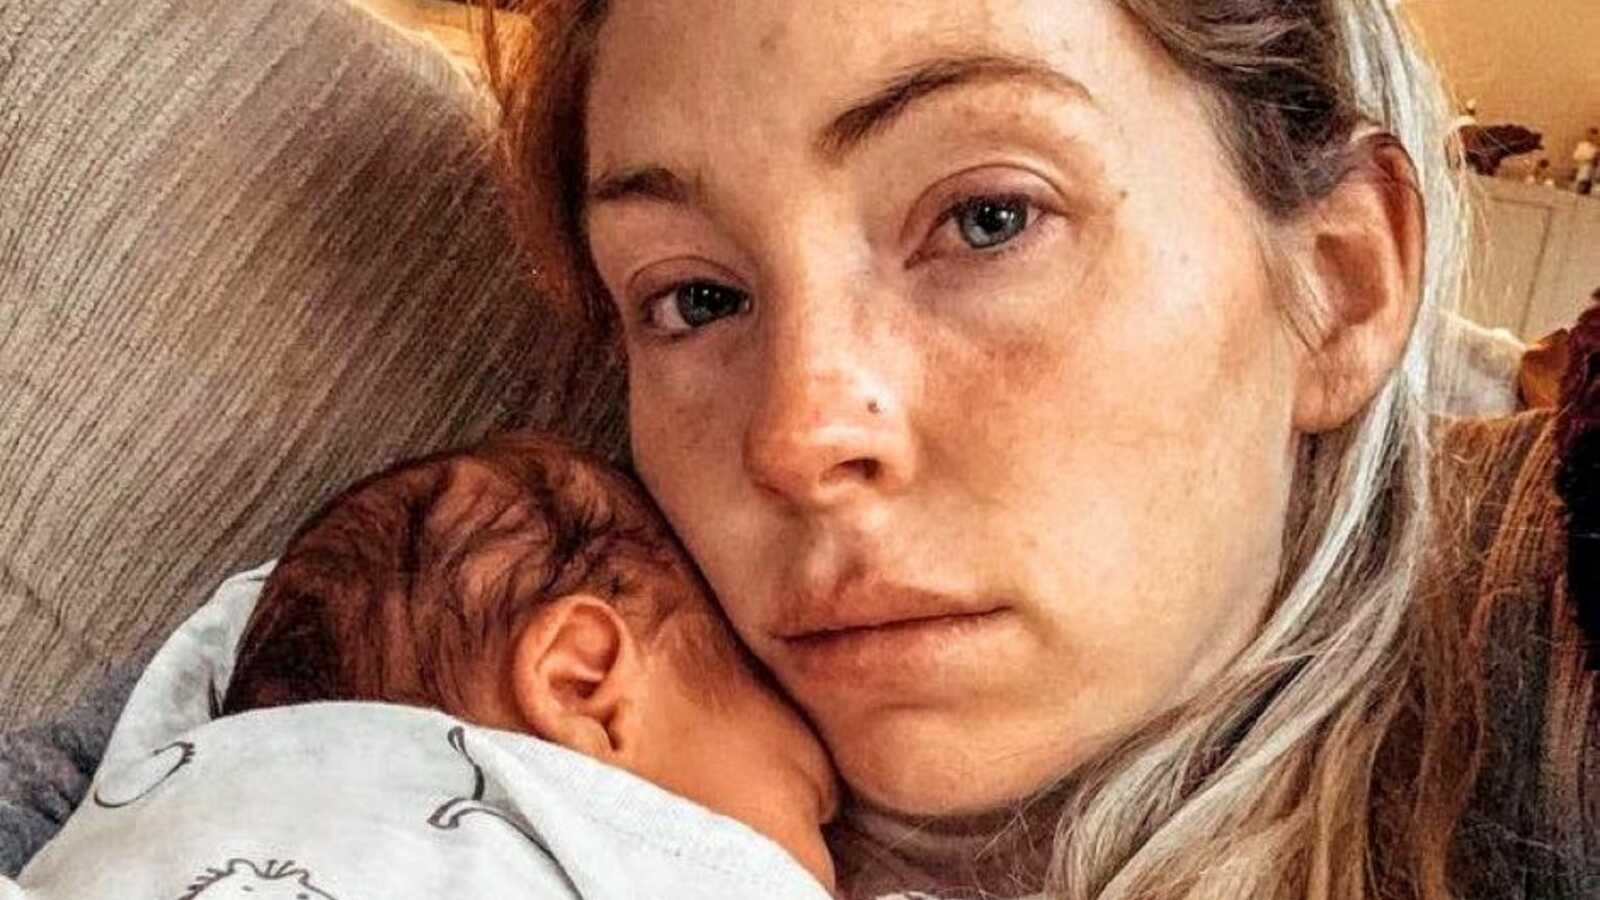 Mom suffering from postpartum anxiety holds her sleeping newborn baby on the couch while trying not to cry